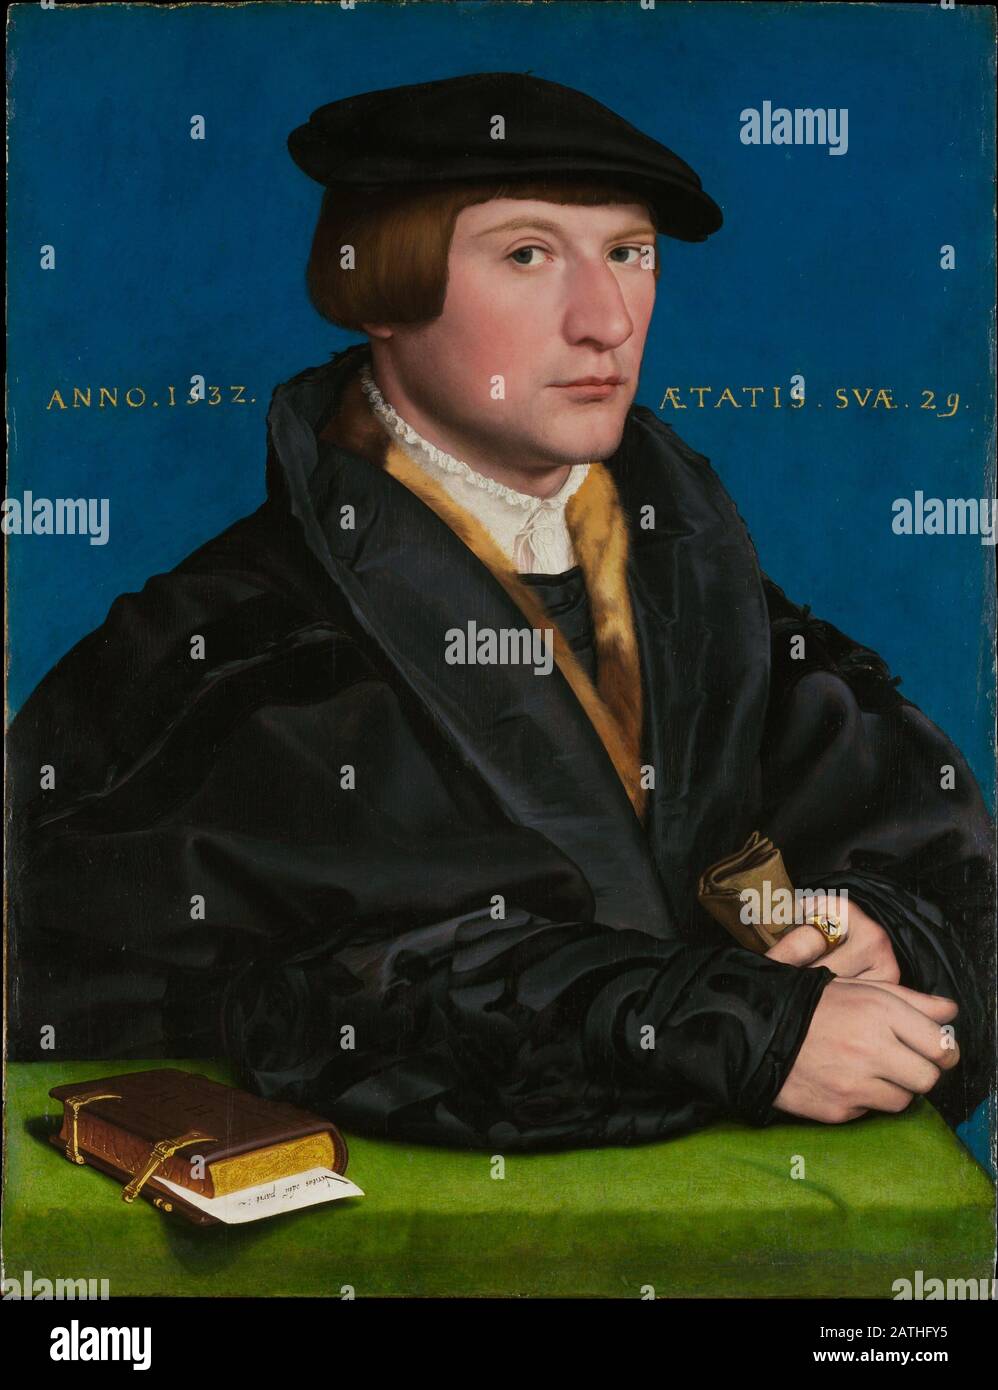 Hans Holbein the Younger German school Portrait of a Member of the Wedigh Family : Hermann von Wedigh III 1532 Oil and gold on oak (42.2 x 32.4 cm) New York, Metropolitan Museum of Art   This sitter, whose ring displays the arms of the Wedighs of Cologne, is probably Hermann von Wedigh III, Metropolitan Museum of Art, New York City. Stock Photo